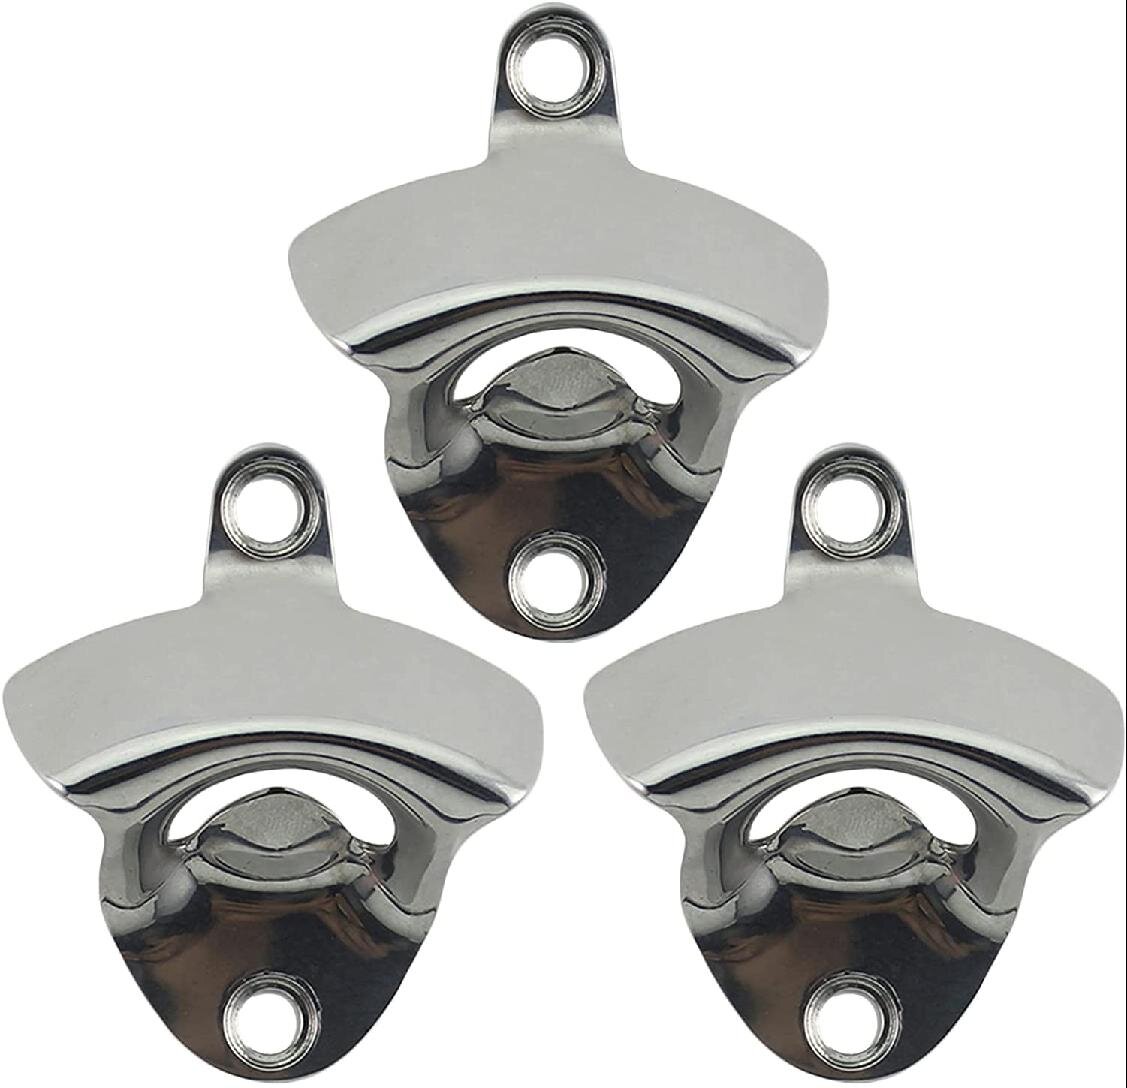 Stainless Steel Wall Mount Beer Bottle Cap Catcher,with 2 Mounting Screws,for Any Kitchen Home Bar or Garage Beer Bottle Cap Catcher Patio Deck